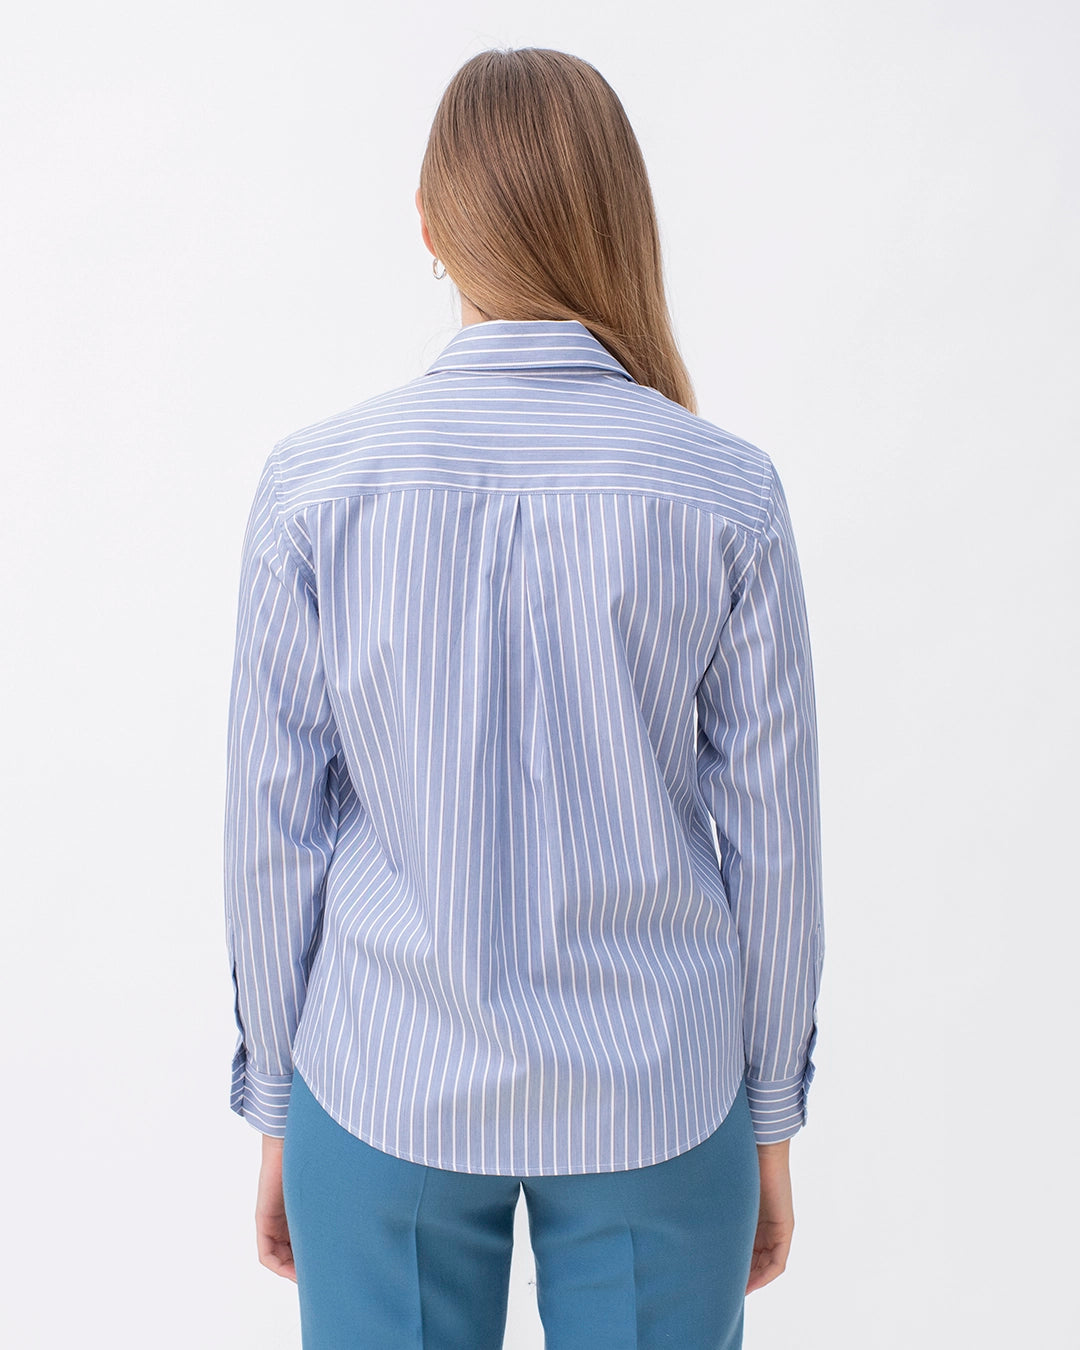 classic-blue-and-red-striped-timeless-top-shirt-17H10